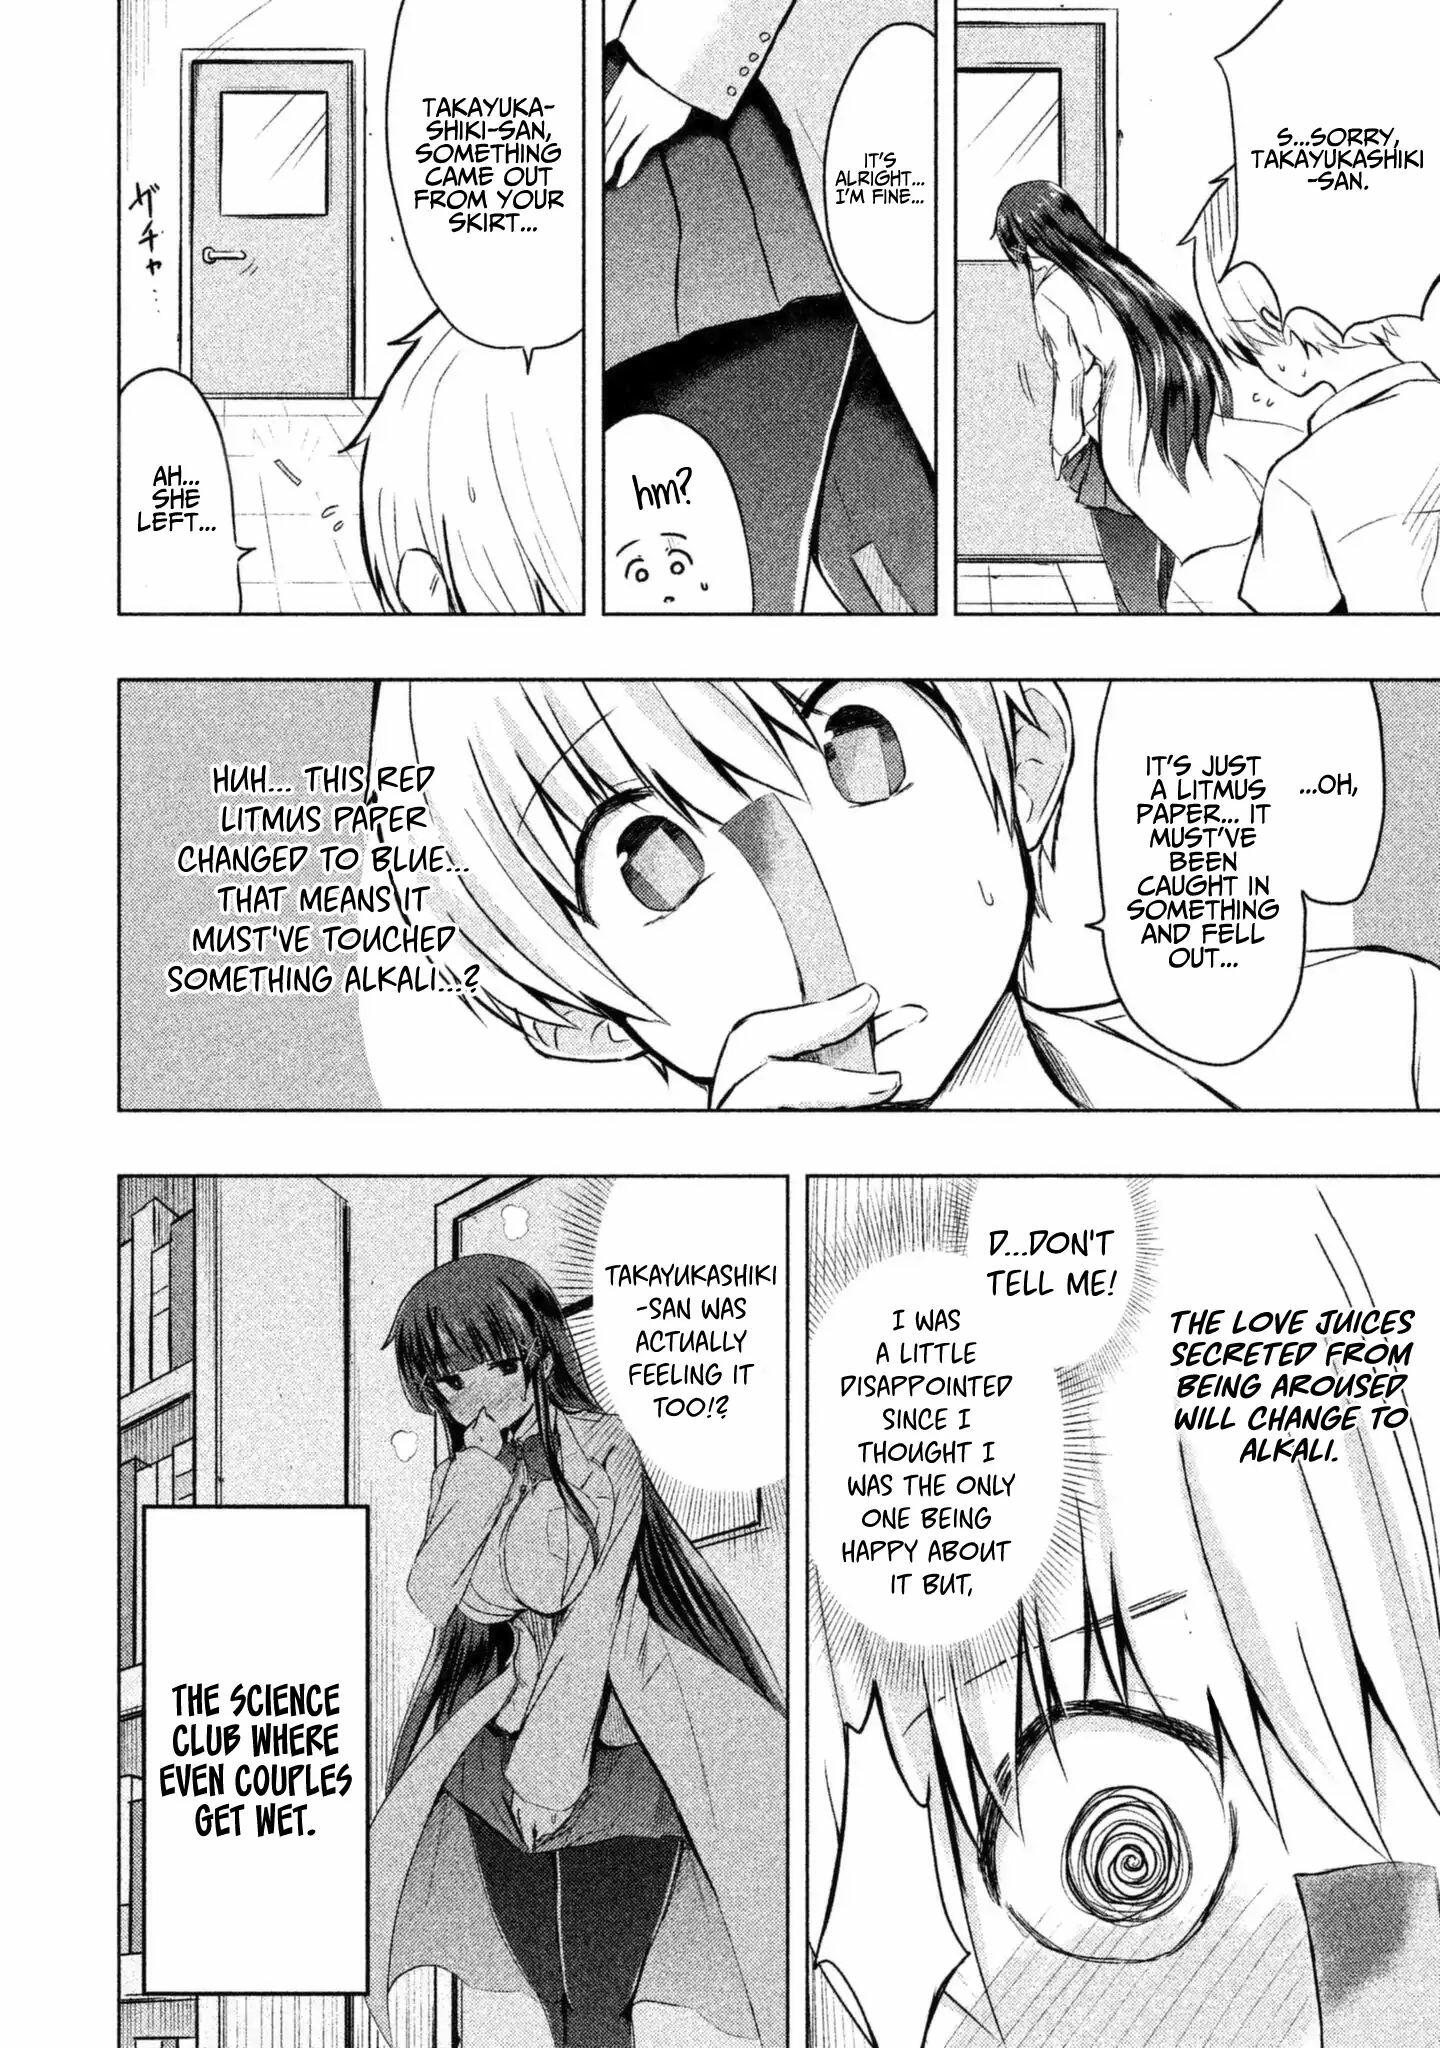 A Girl Who Is Very Well-Informed About Weird Knowledge, Takayukashiki Souko-San Vol.1 Chapter 9: Science Club page 9 - Mangakakalots.com